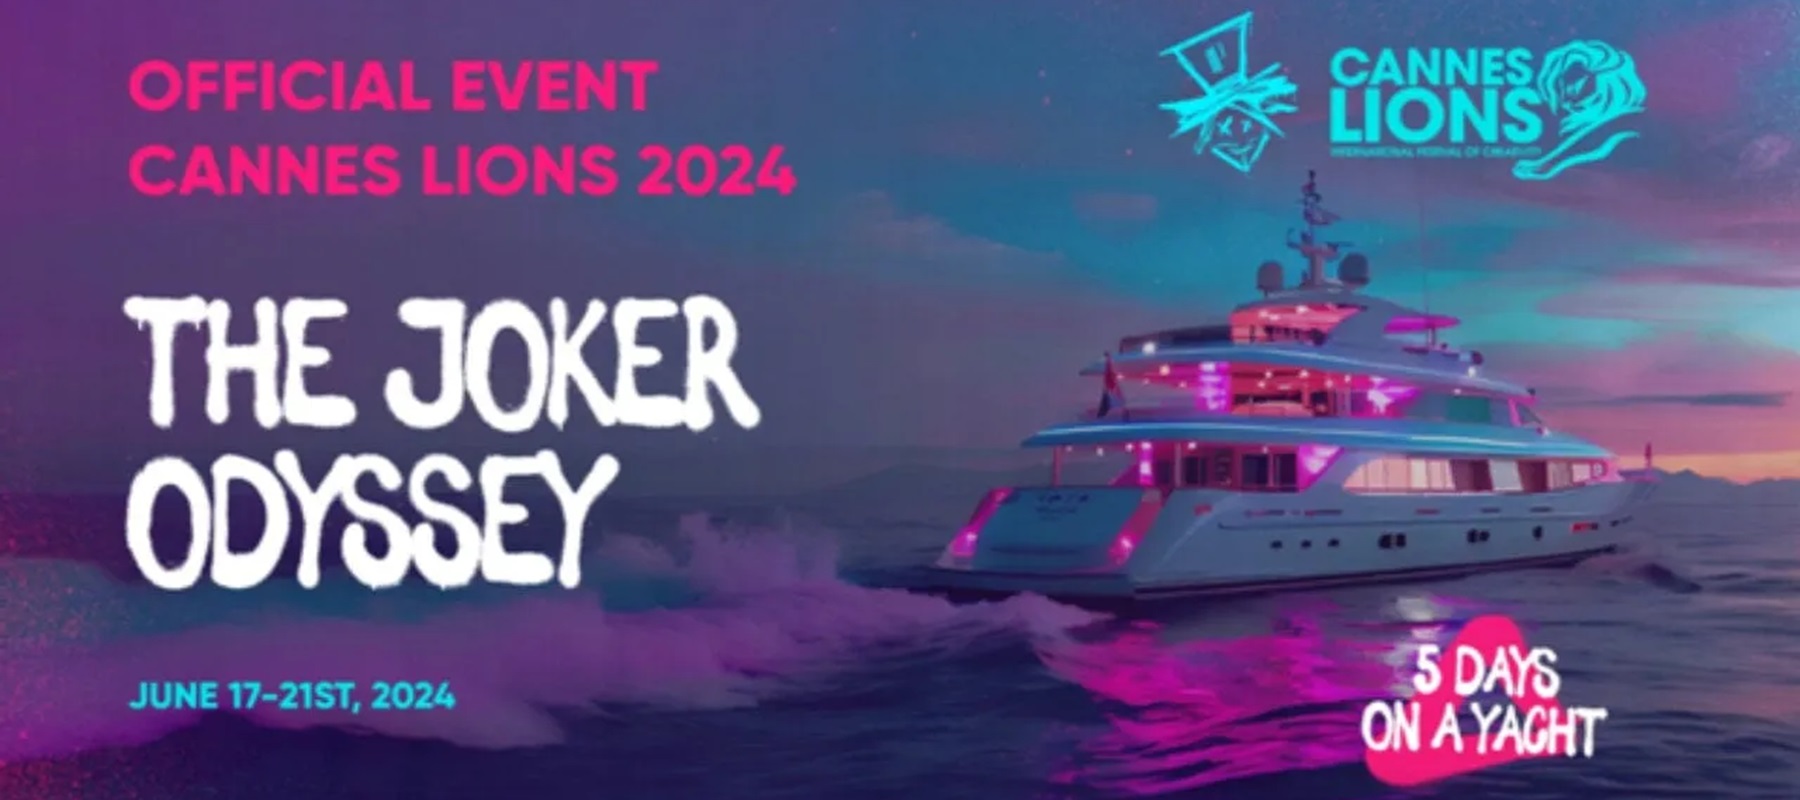 Partouche Multiverse launches The Joker Odyssey, an event dedicated to creativity at Cannes